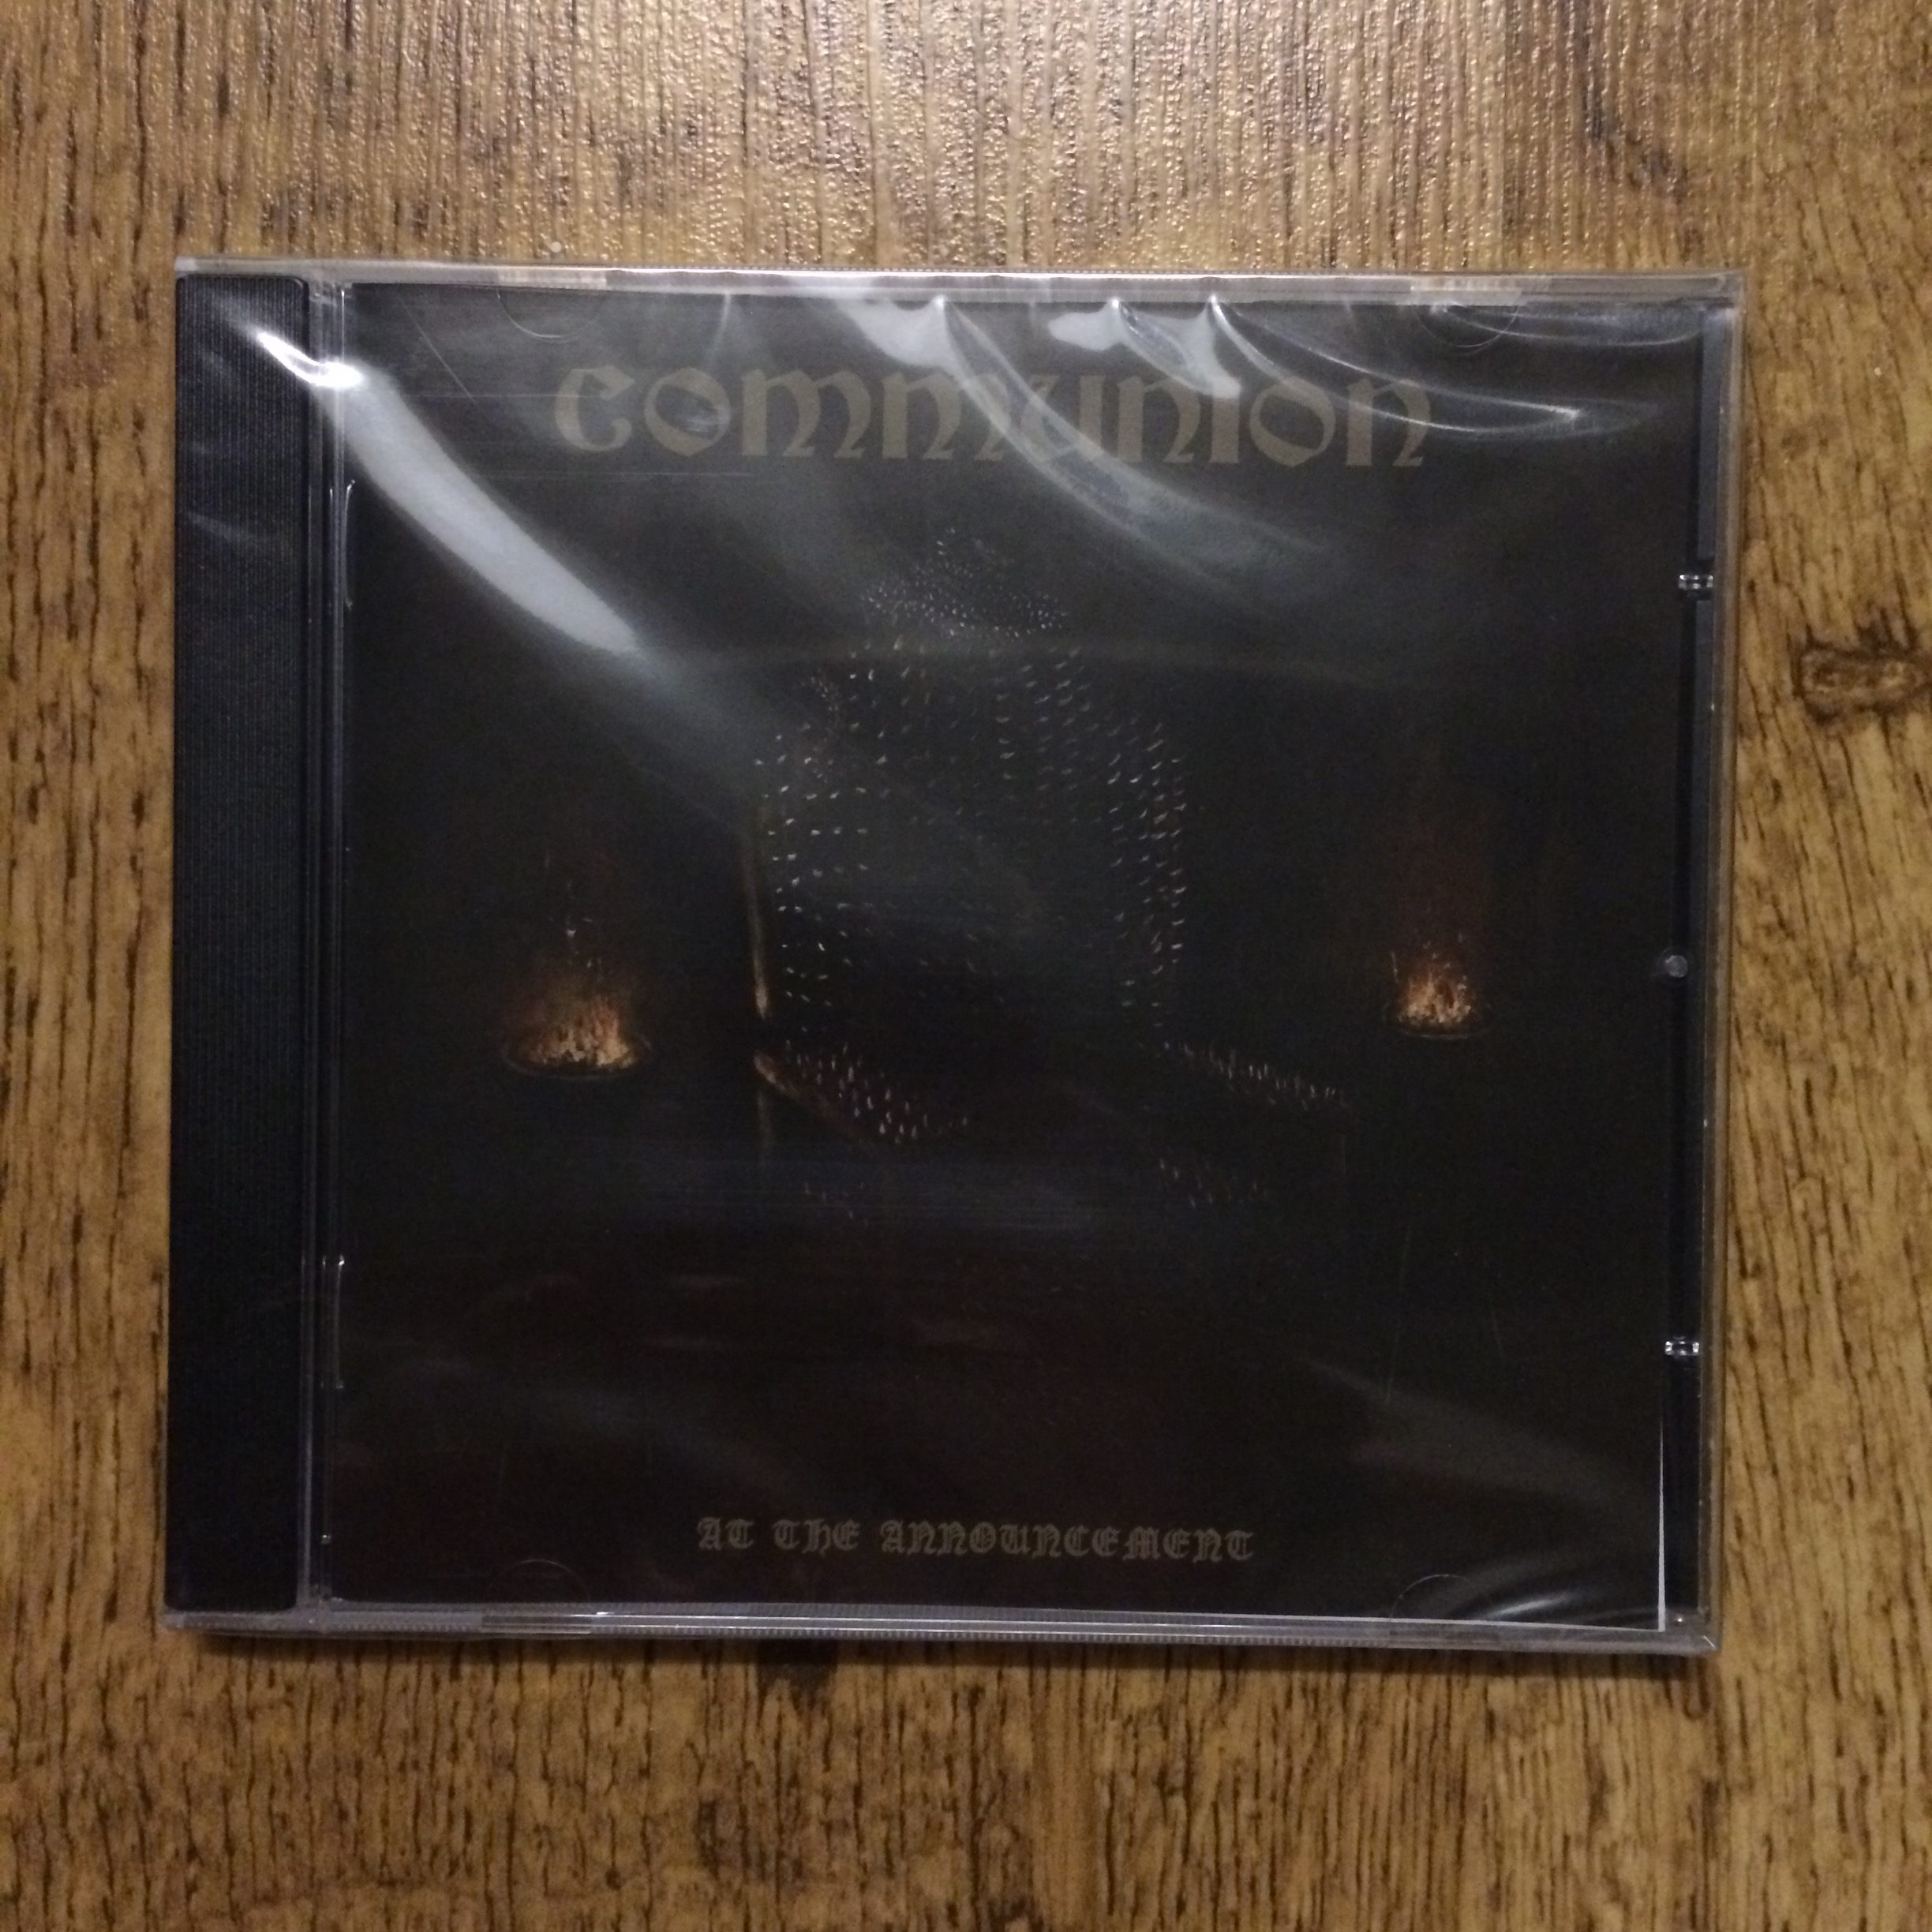 Photo of the Communion - "At the Announcement" CD